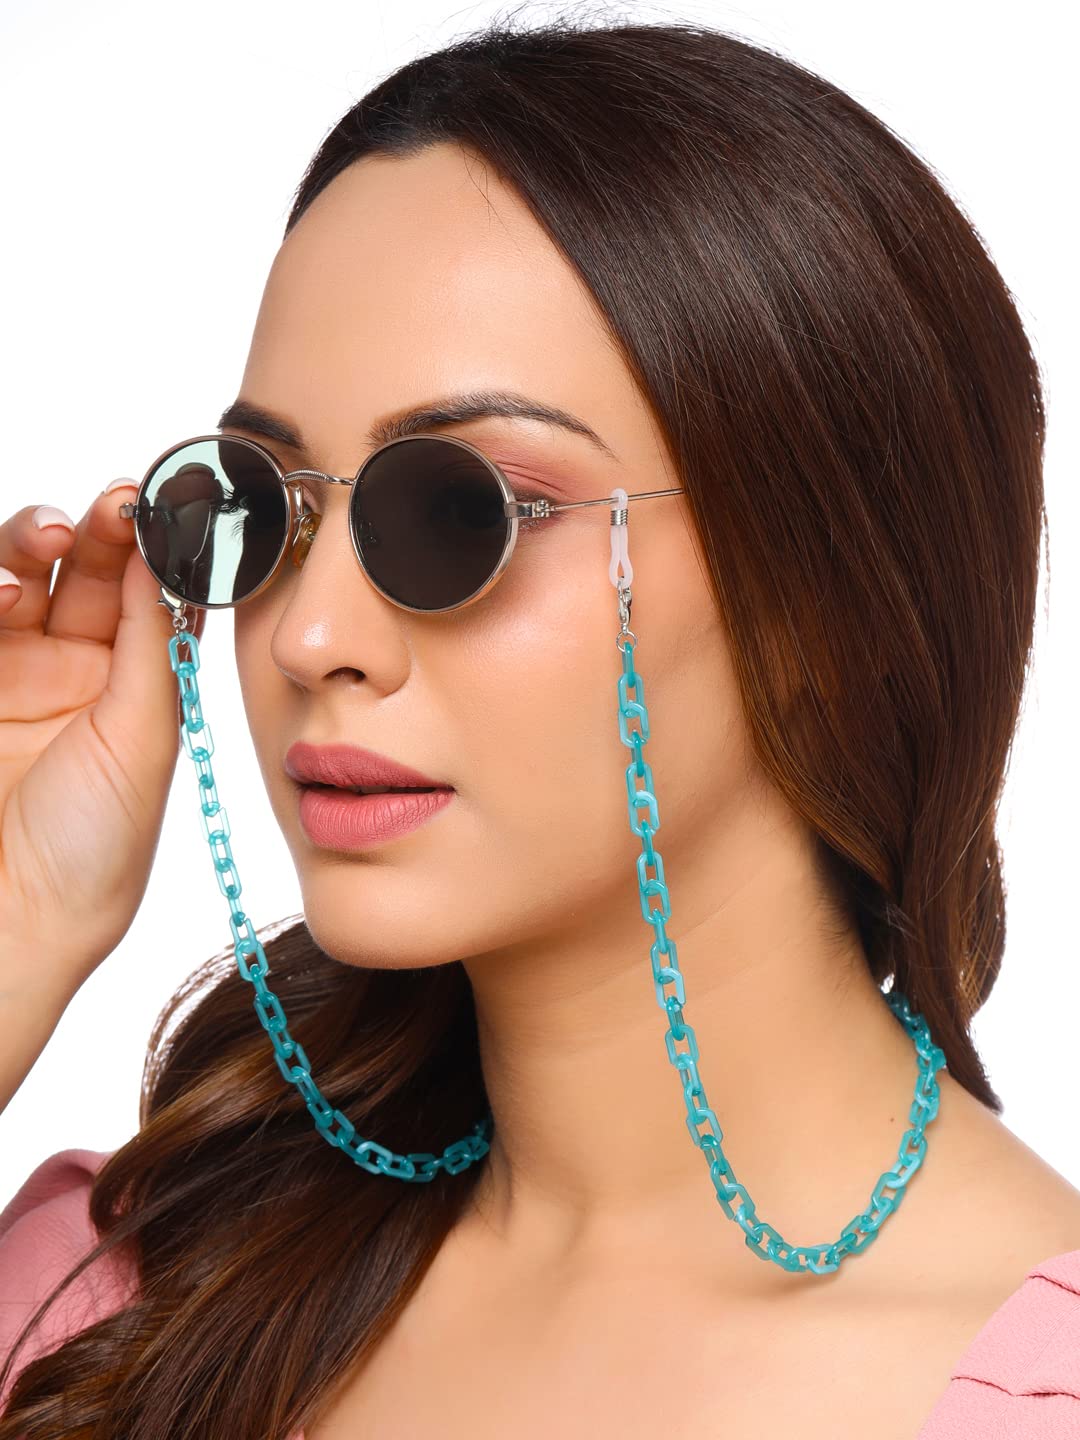 Heddz Beaded Spectacle Chain for Eyewear Frames Specs Reading Glasses Sunglasses  chain Beads Stainless Steel Chain Price in India - Buy Heddz Beaded  Spectacle Chain for Eyewear Frames Specs Reading Glasses Sunglasses